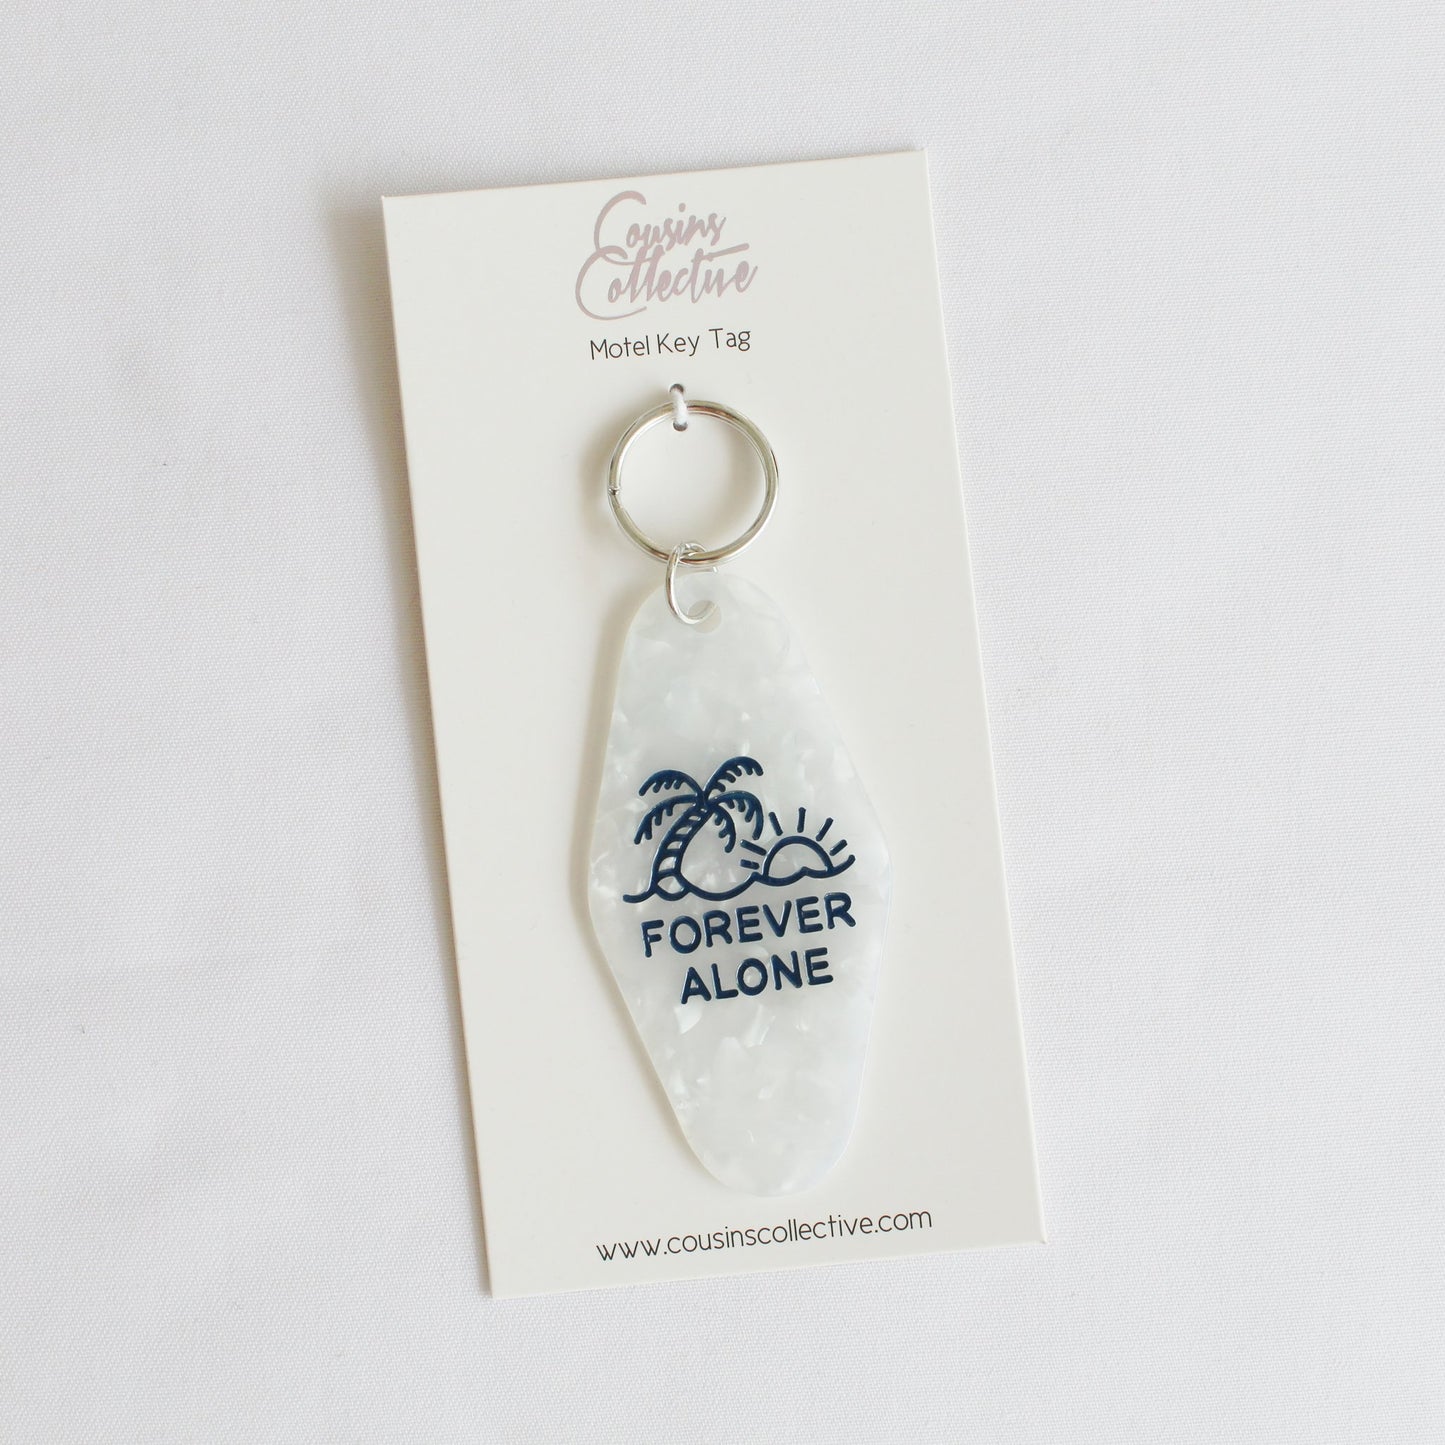 Forever Alone Motel Keytag by Cousins Collective